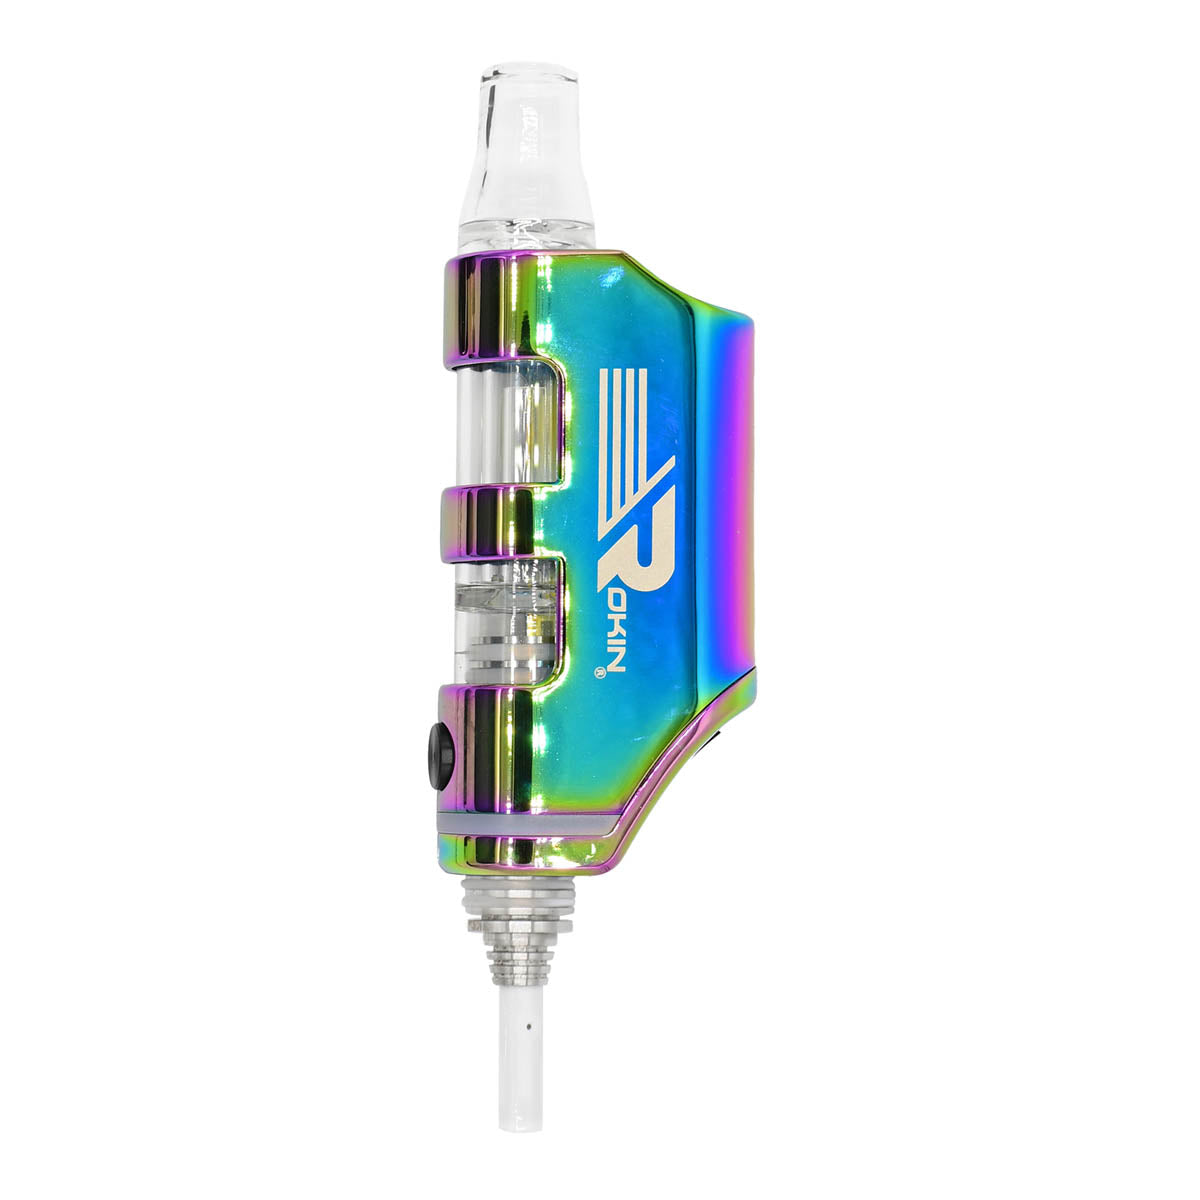 Rokin Stinger electric nectar collector in Multicolor finish